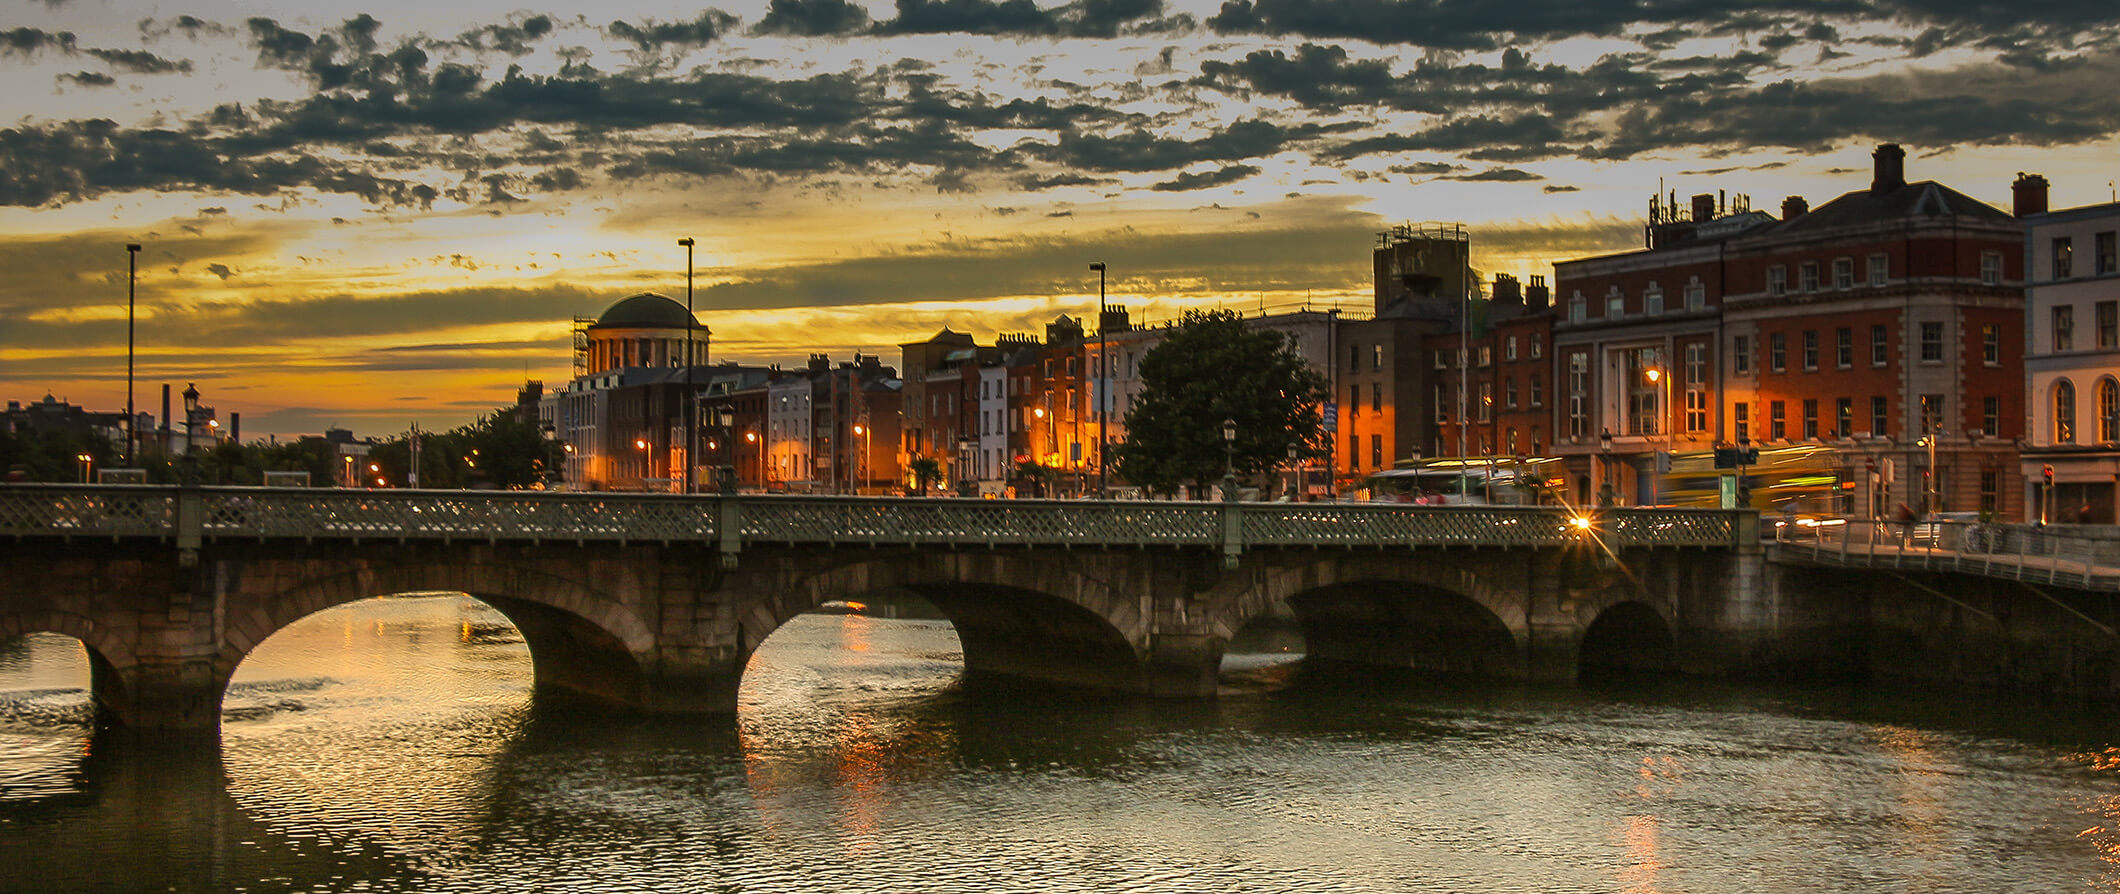 Dublin looking across the bridge with the city in the background at dusk